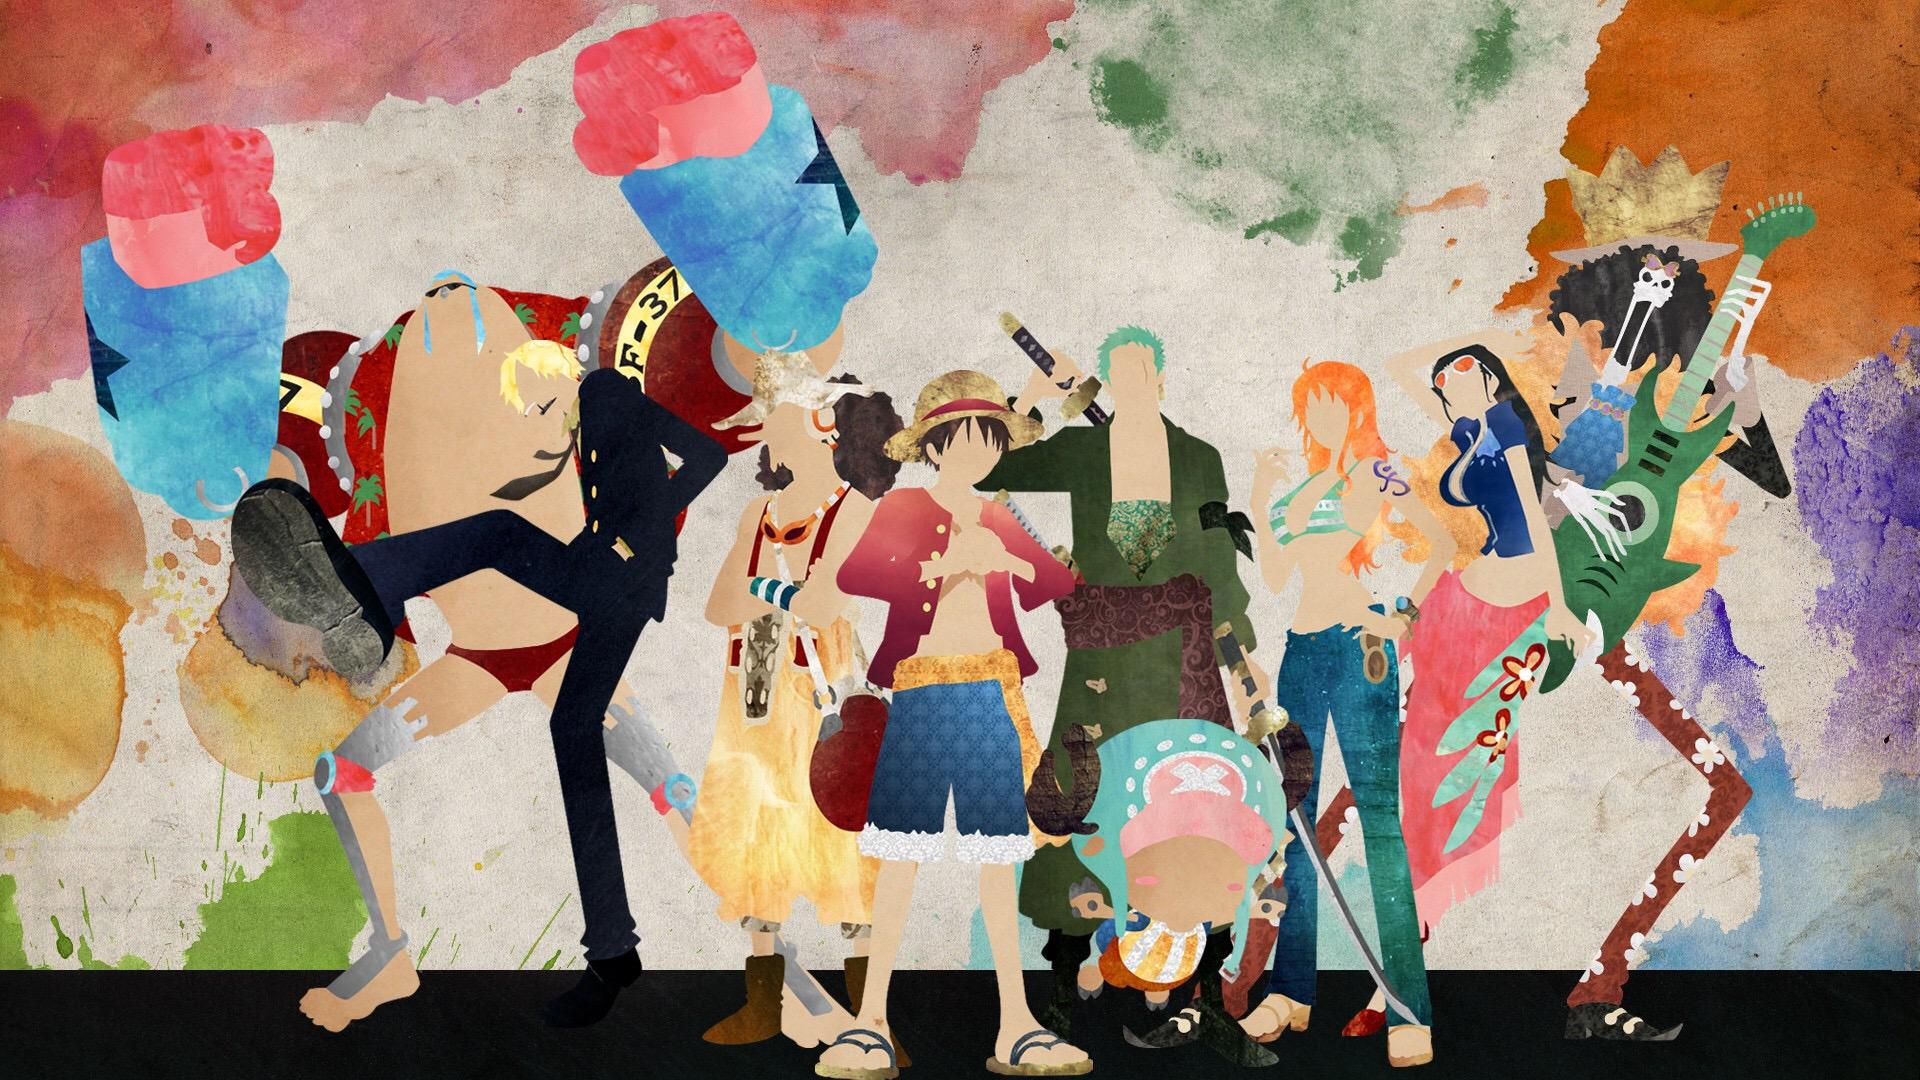 Nami One Piece Wallpapers - ntbeamng